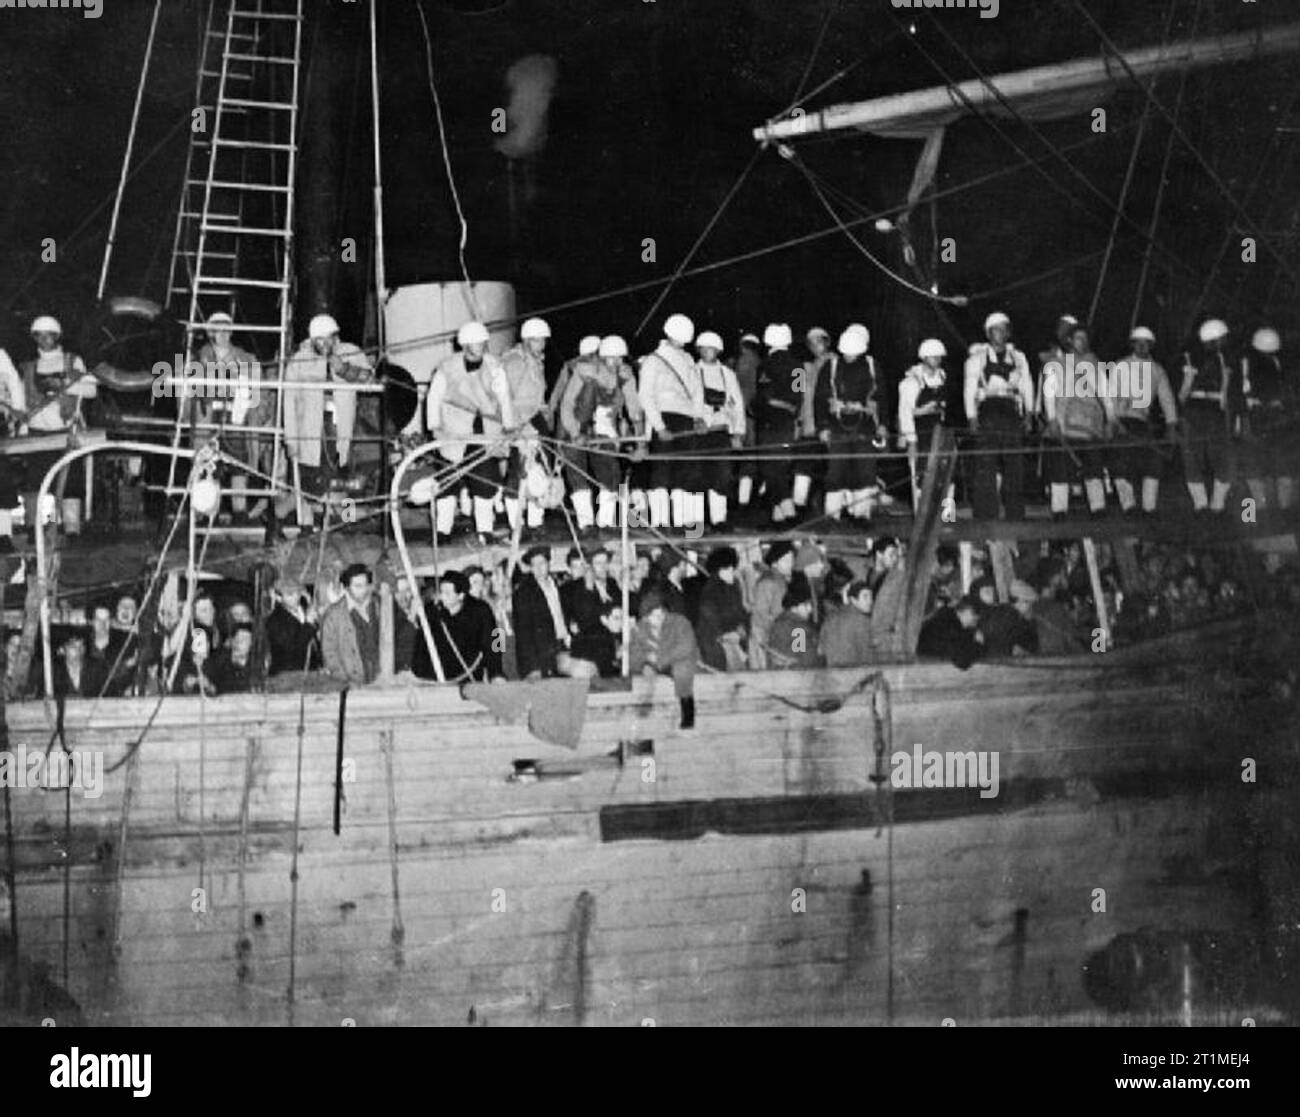 The British Mandate in Palestine 1917-1948 Illegal immigrants arriving into Palestine: The Jewish illegal immigrant ship LANEGEV at the port of Haifa. A Royal Navy boarding party are seen on board the over-crowded vessel. Stock Photo